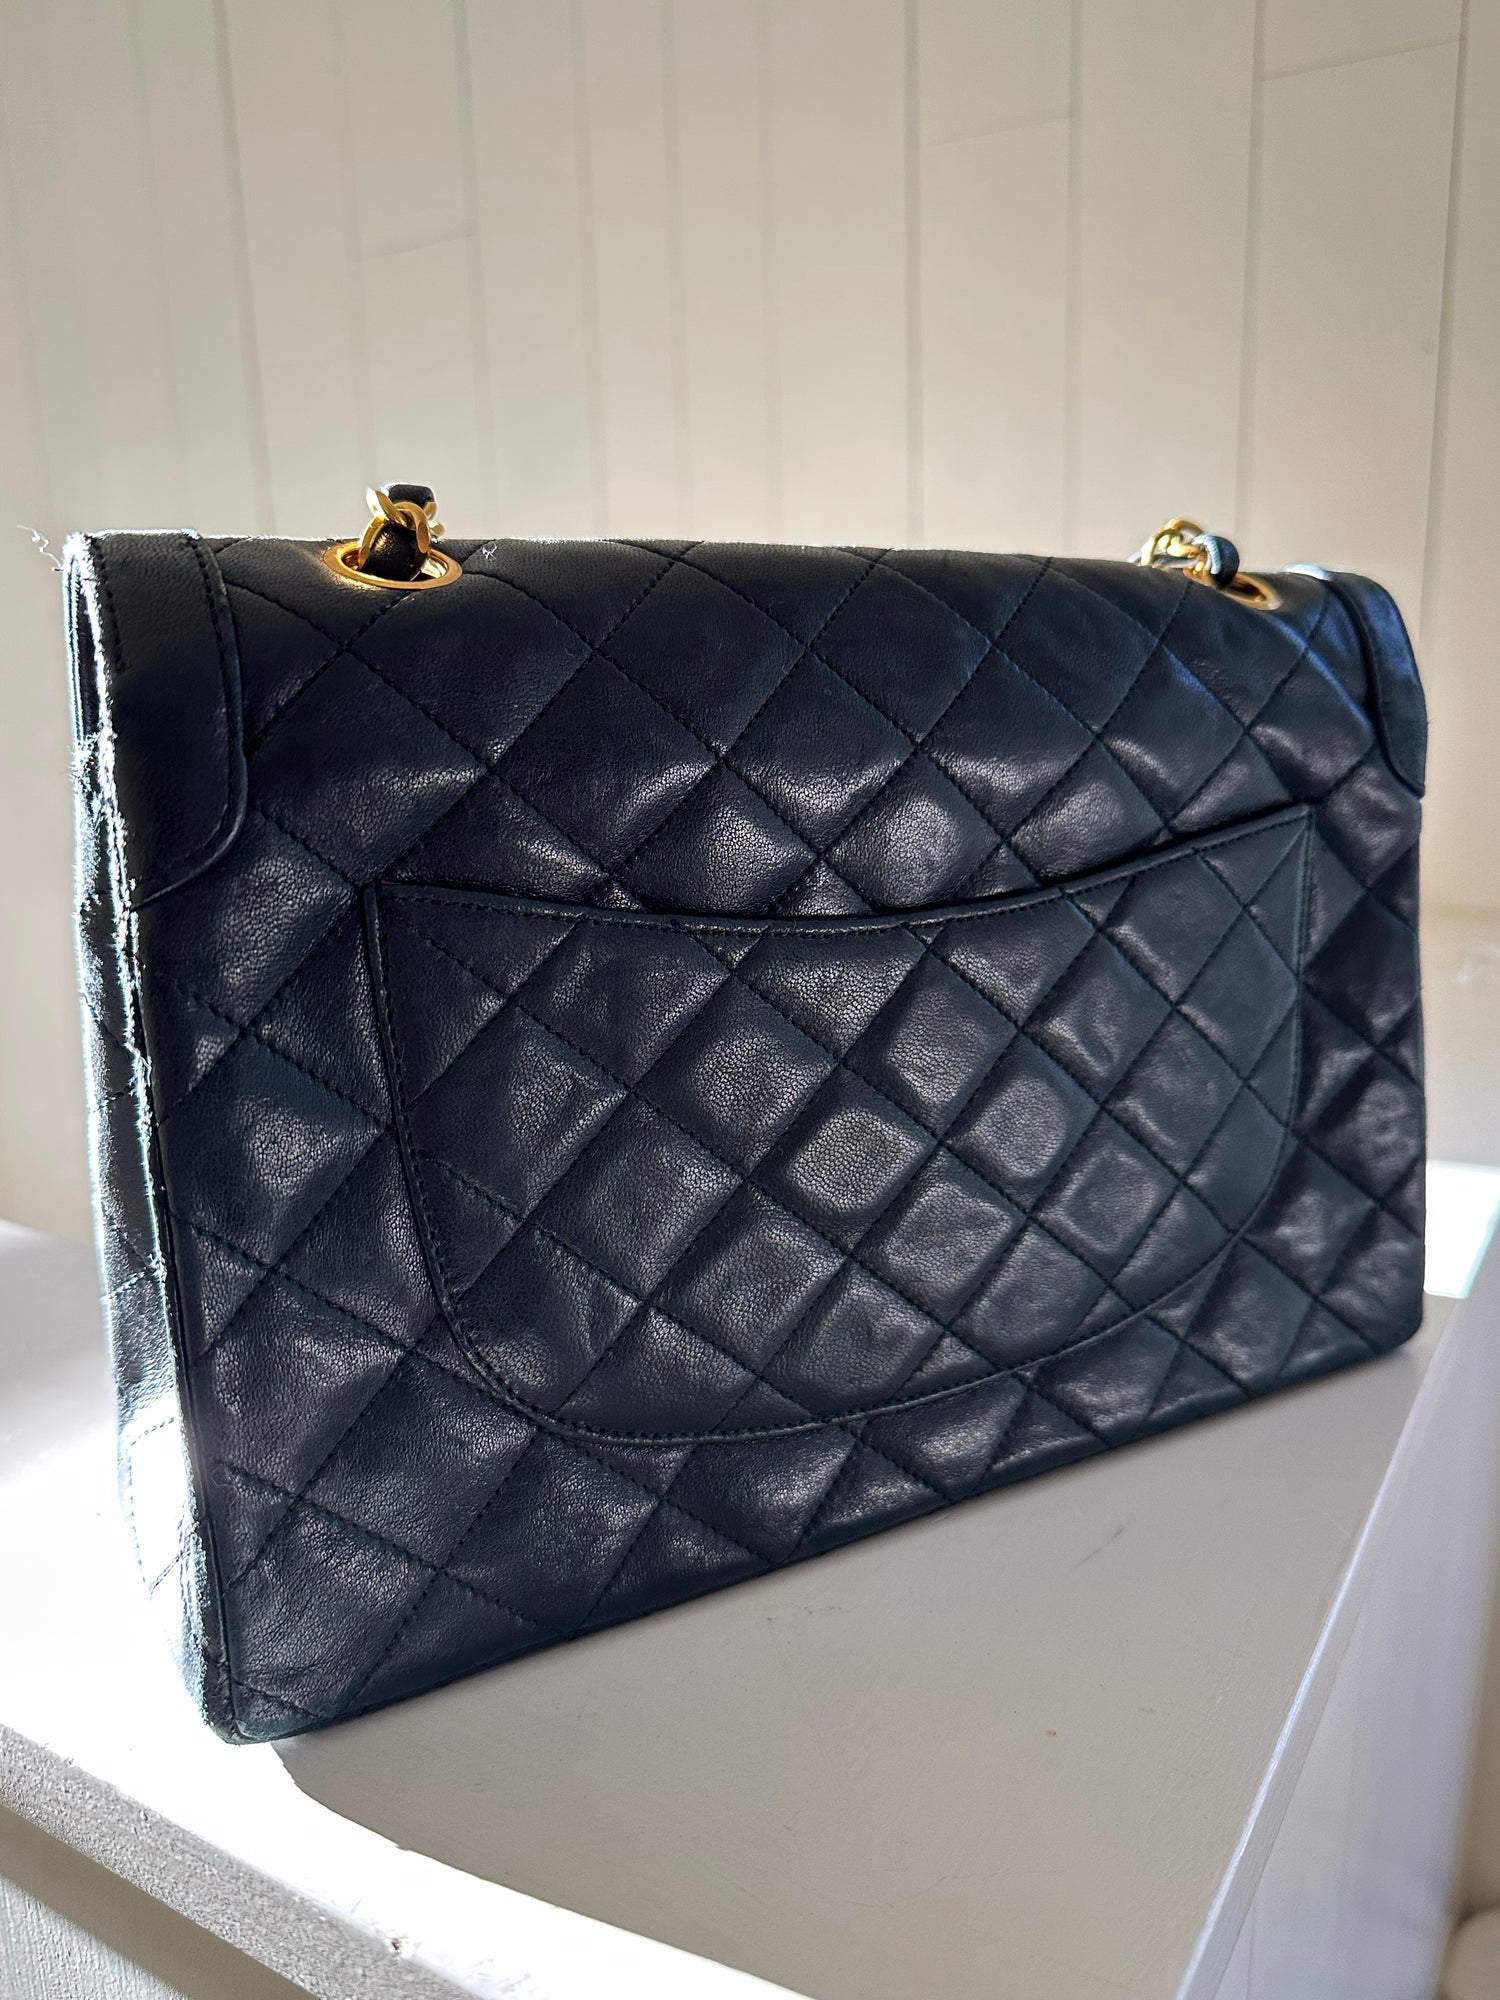 Chanel Bag Quilted Lambskin Flap Bag Premium Quality With Box & Dust Bag  (J1396) - KDB Deals